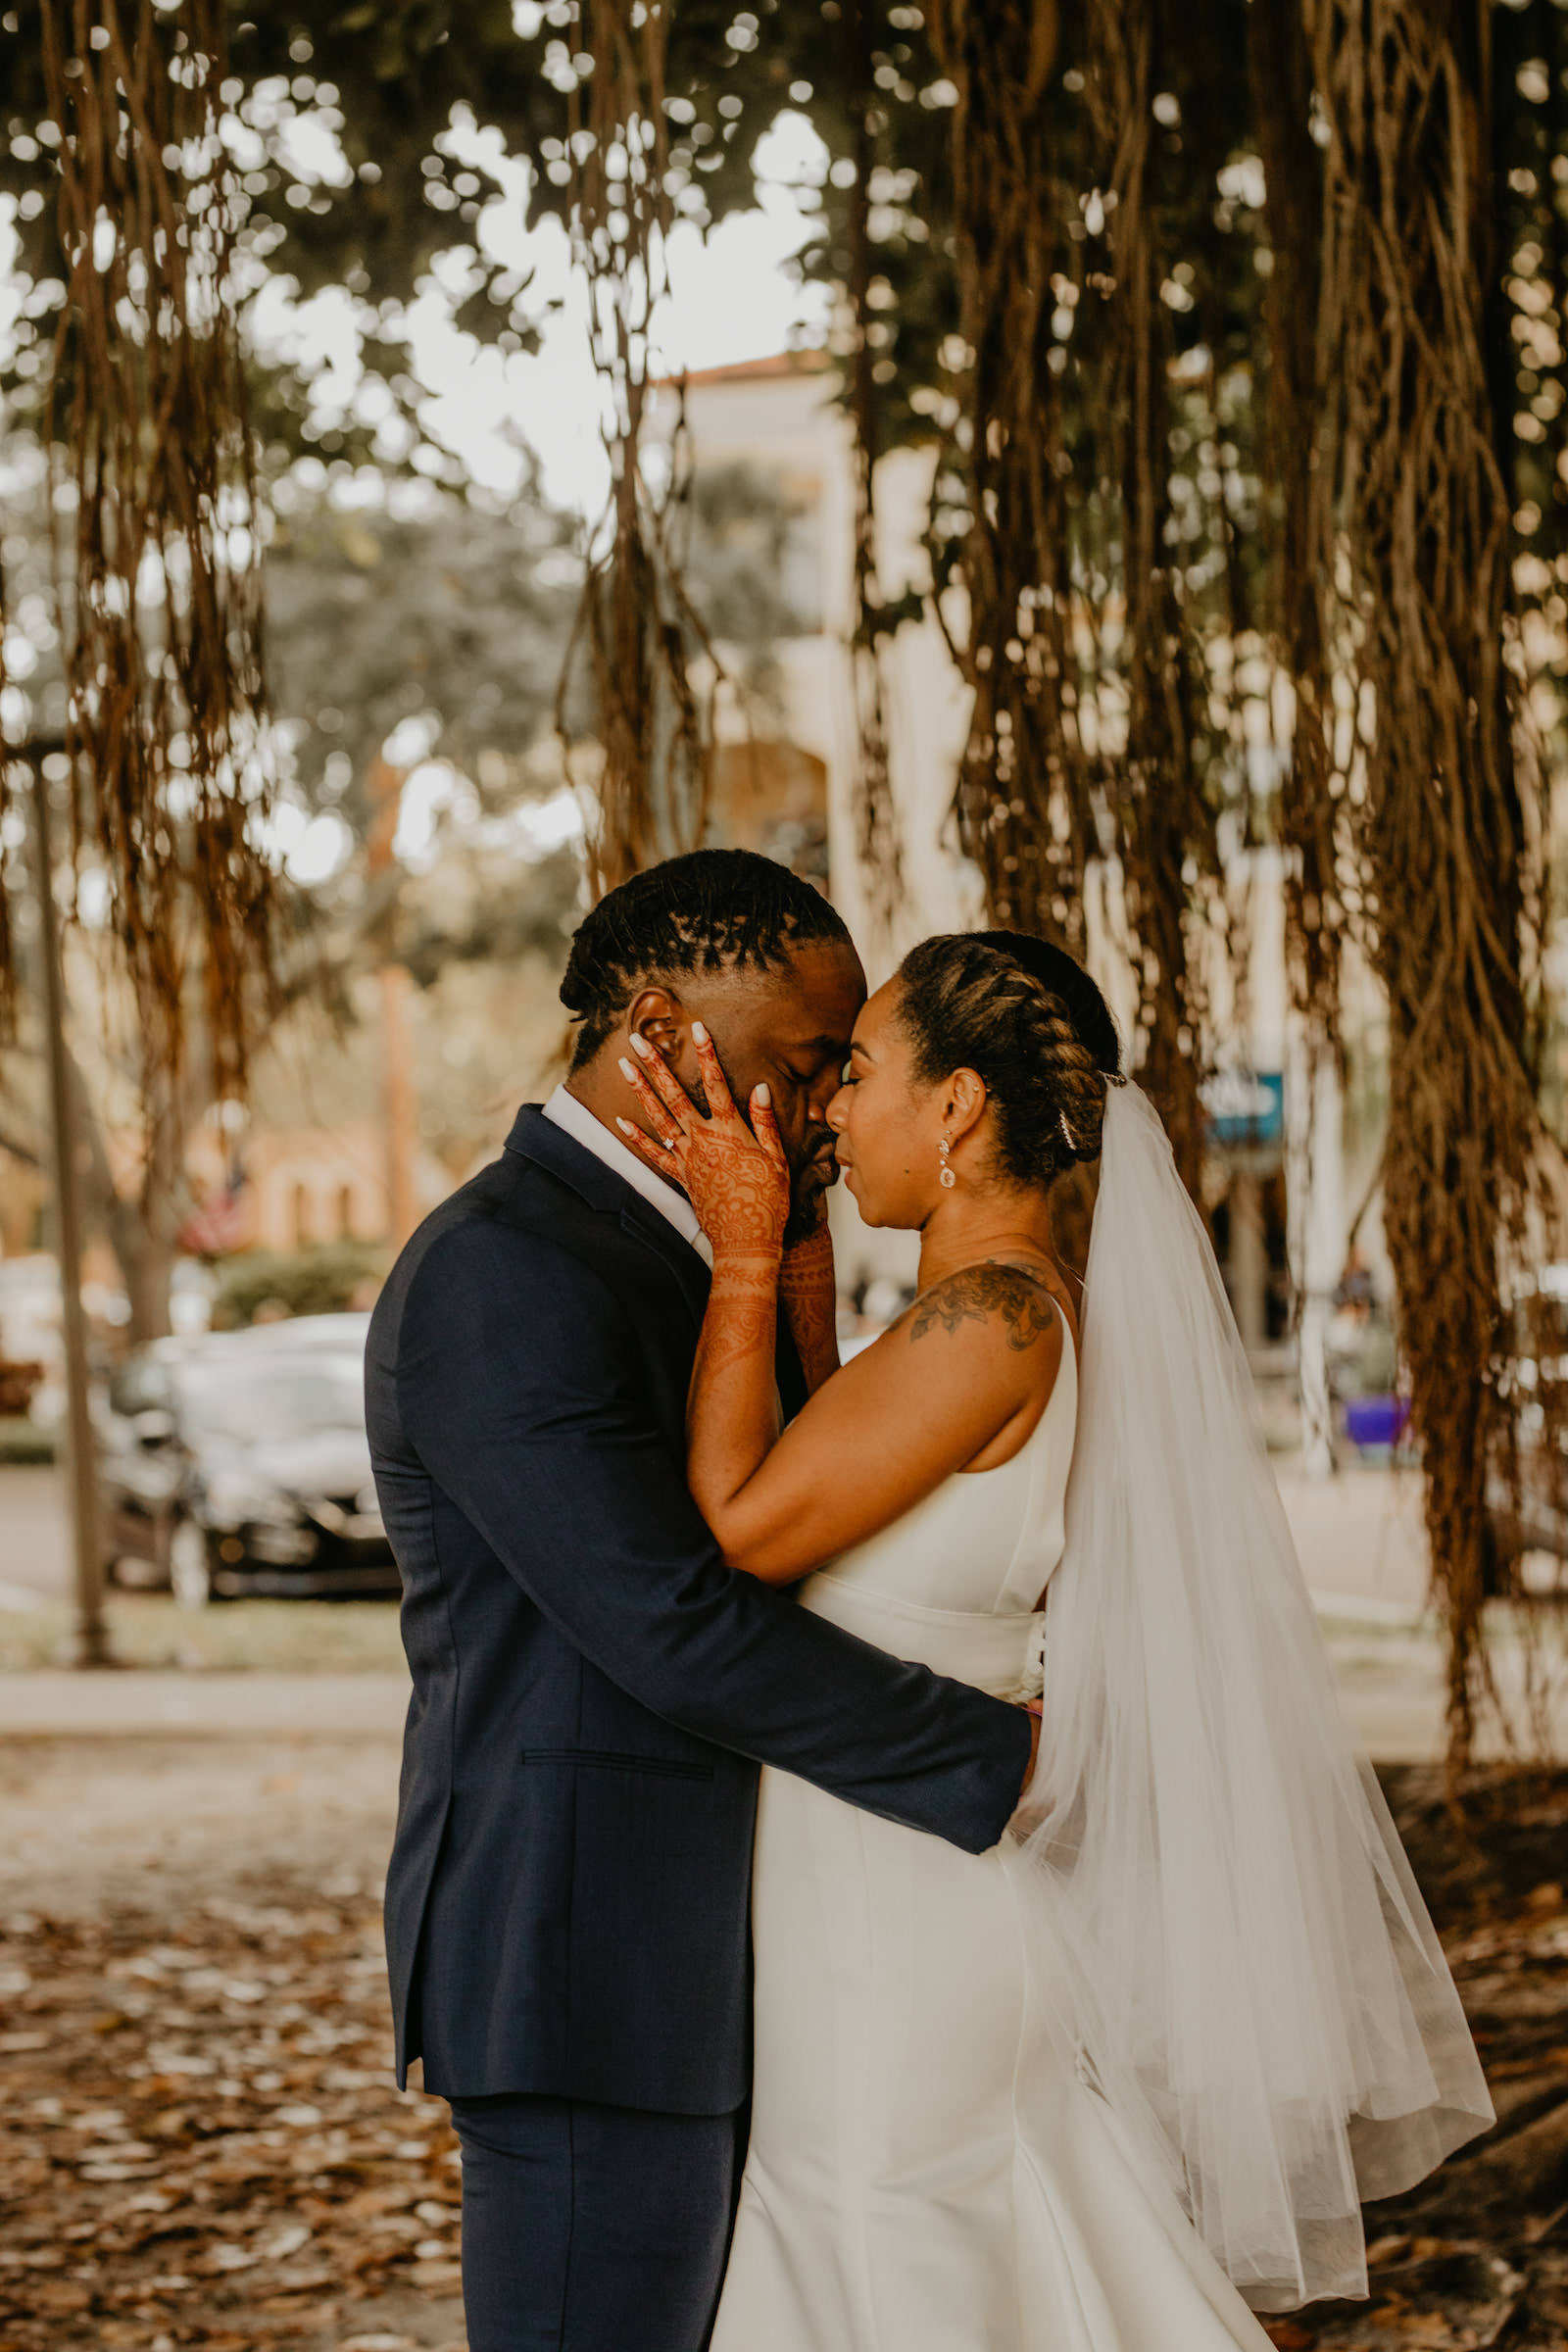 Intimate Elopement Wedding, Bride Wearing Fit and Flare Wedding Dress with Rhinestone Crystal Belt, Groom Wearing Navy Blue Suit and White Tie from Behind Under Banyan Trees, First Look Photo